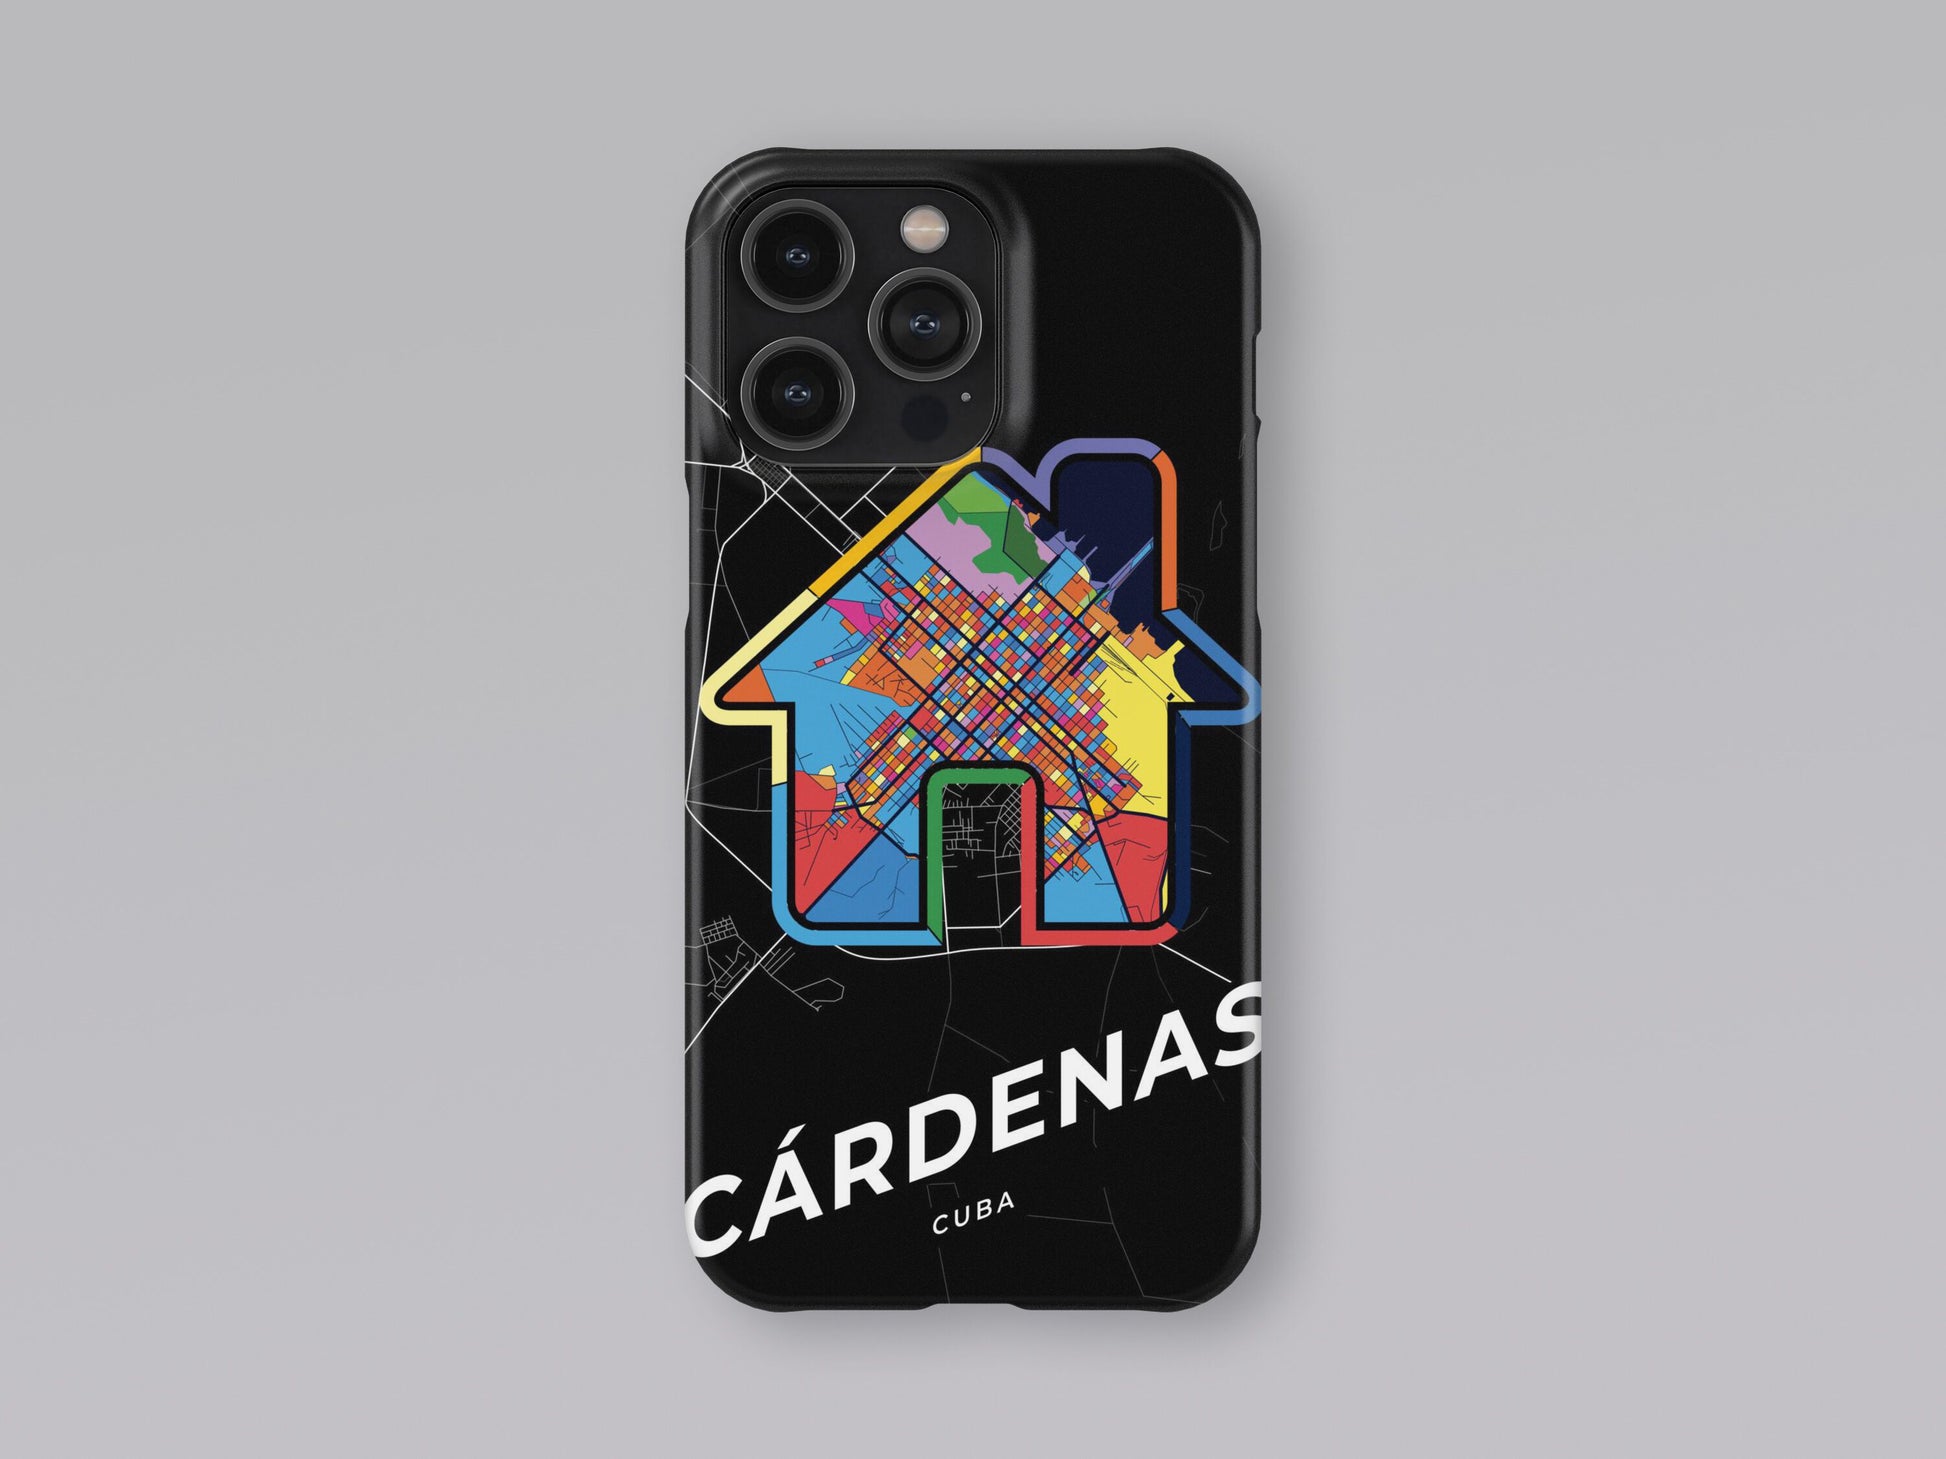 Cárdenas Cuba slim phone case with colorful icon. Birthday, wedding or housewarming gift. Couple match cases. 3